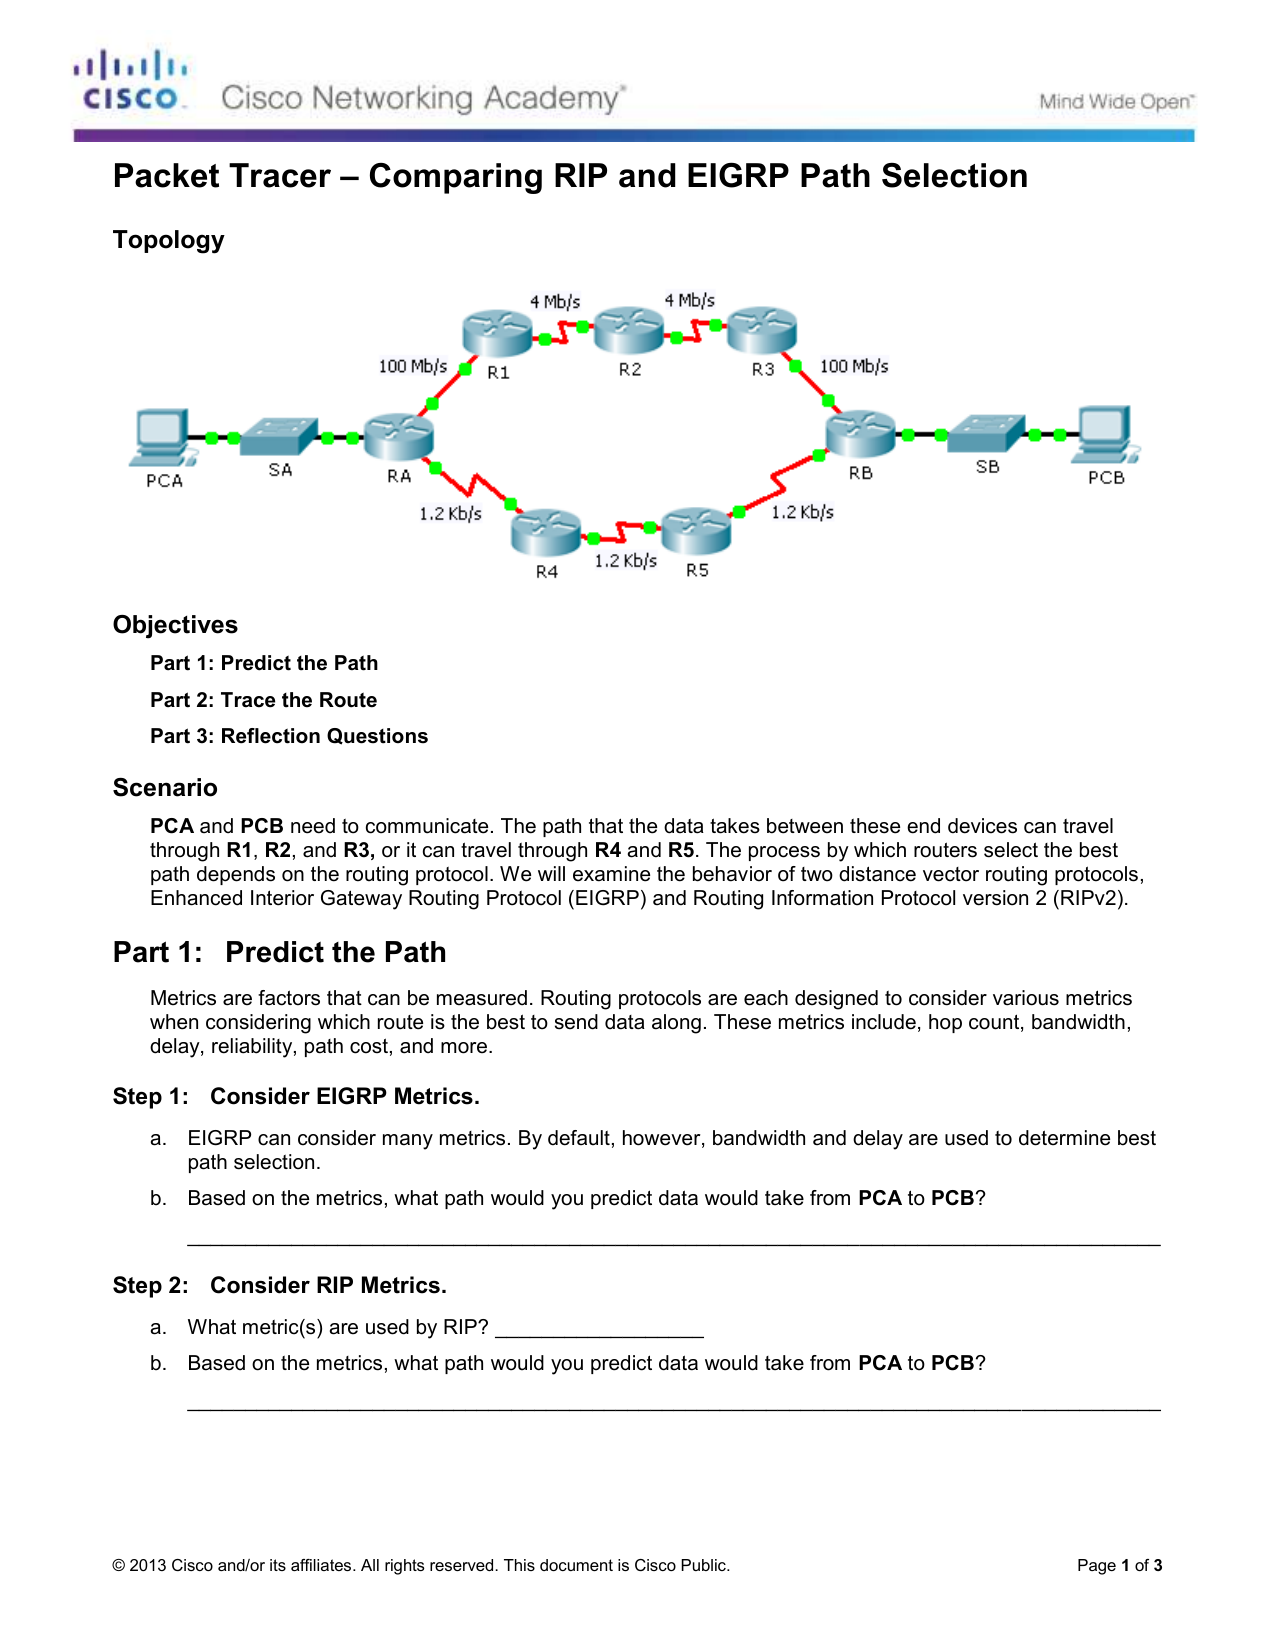 7.2 2.4 packet tracer